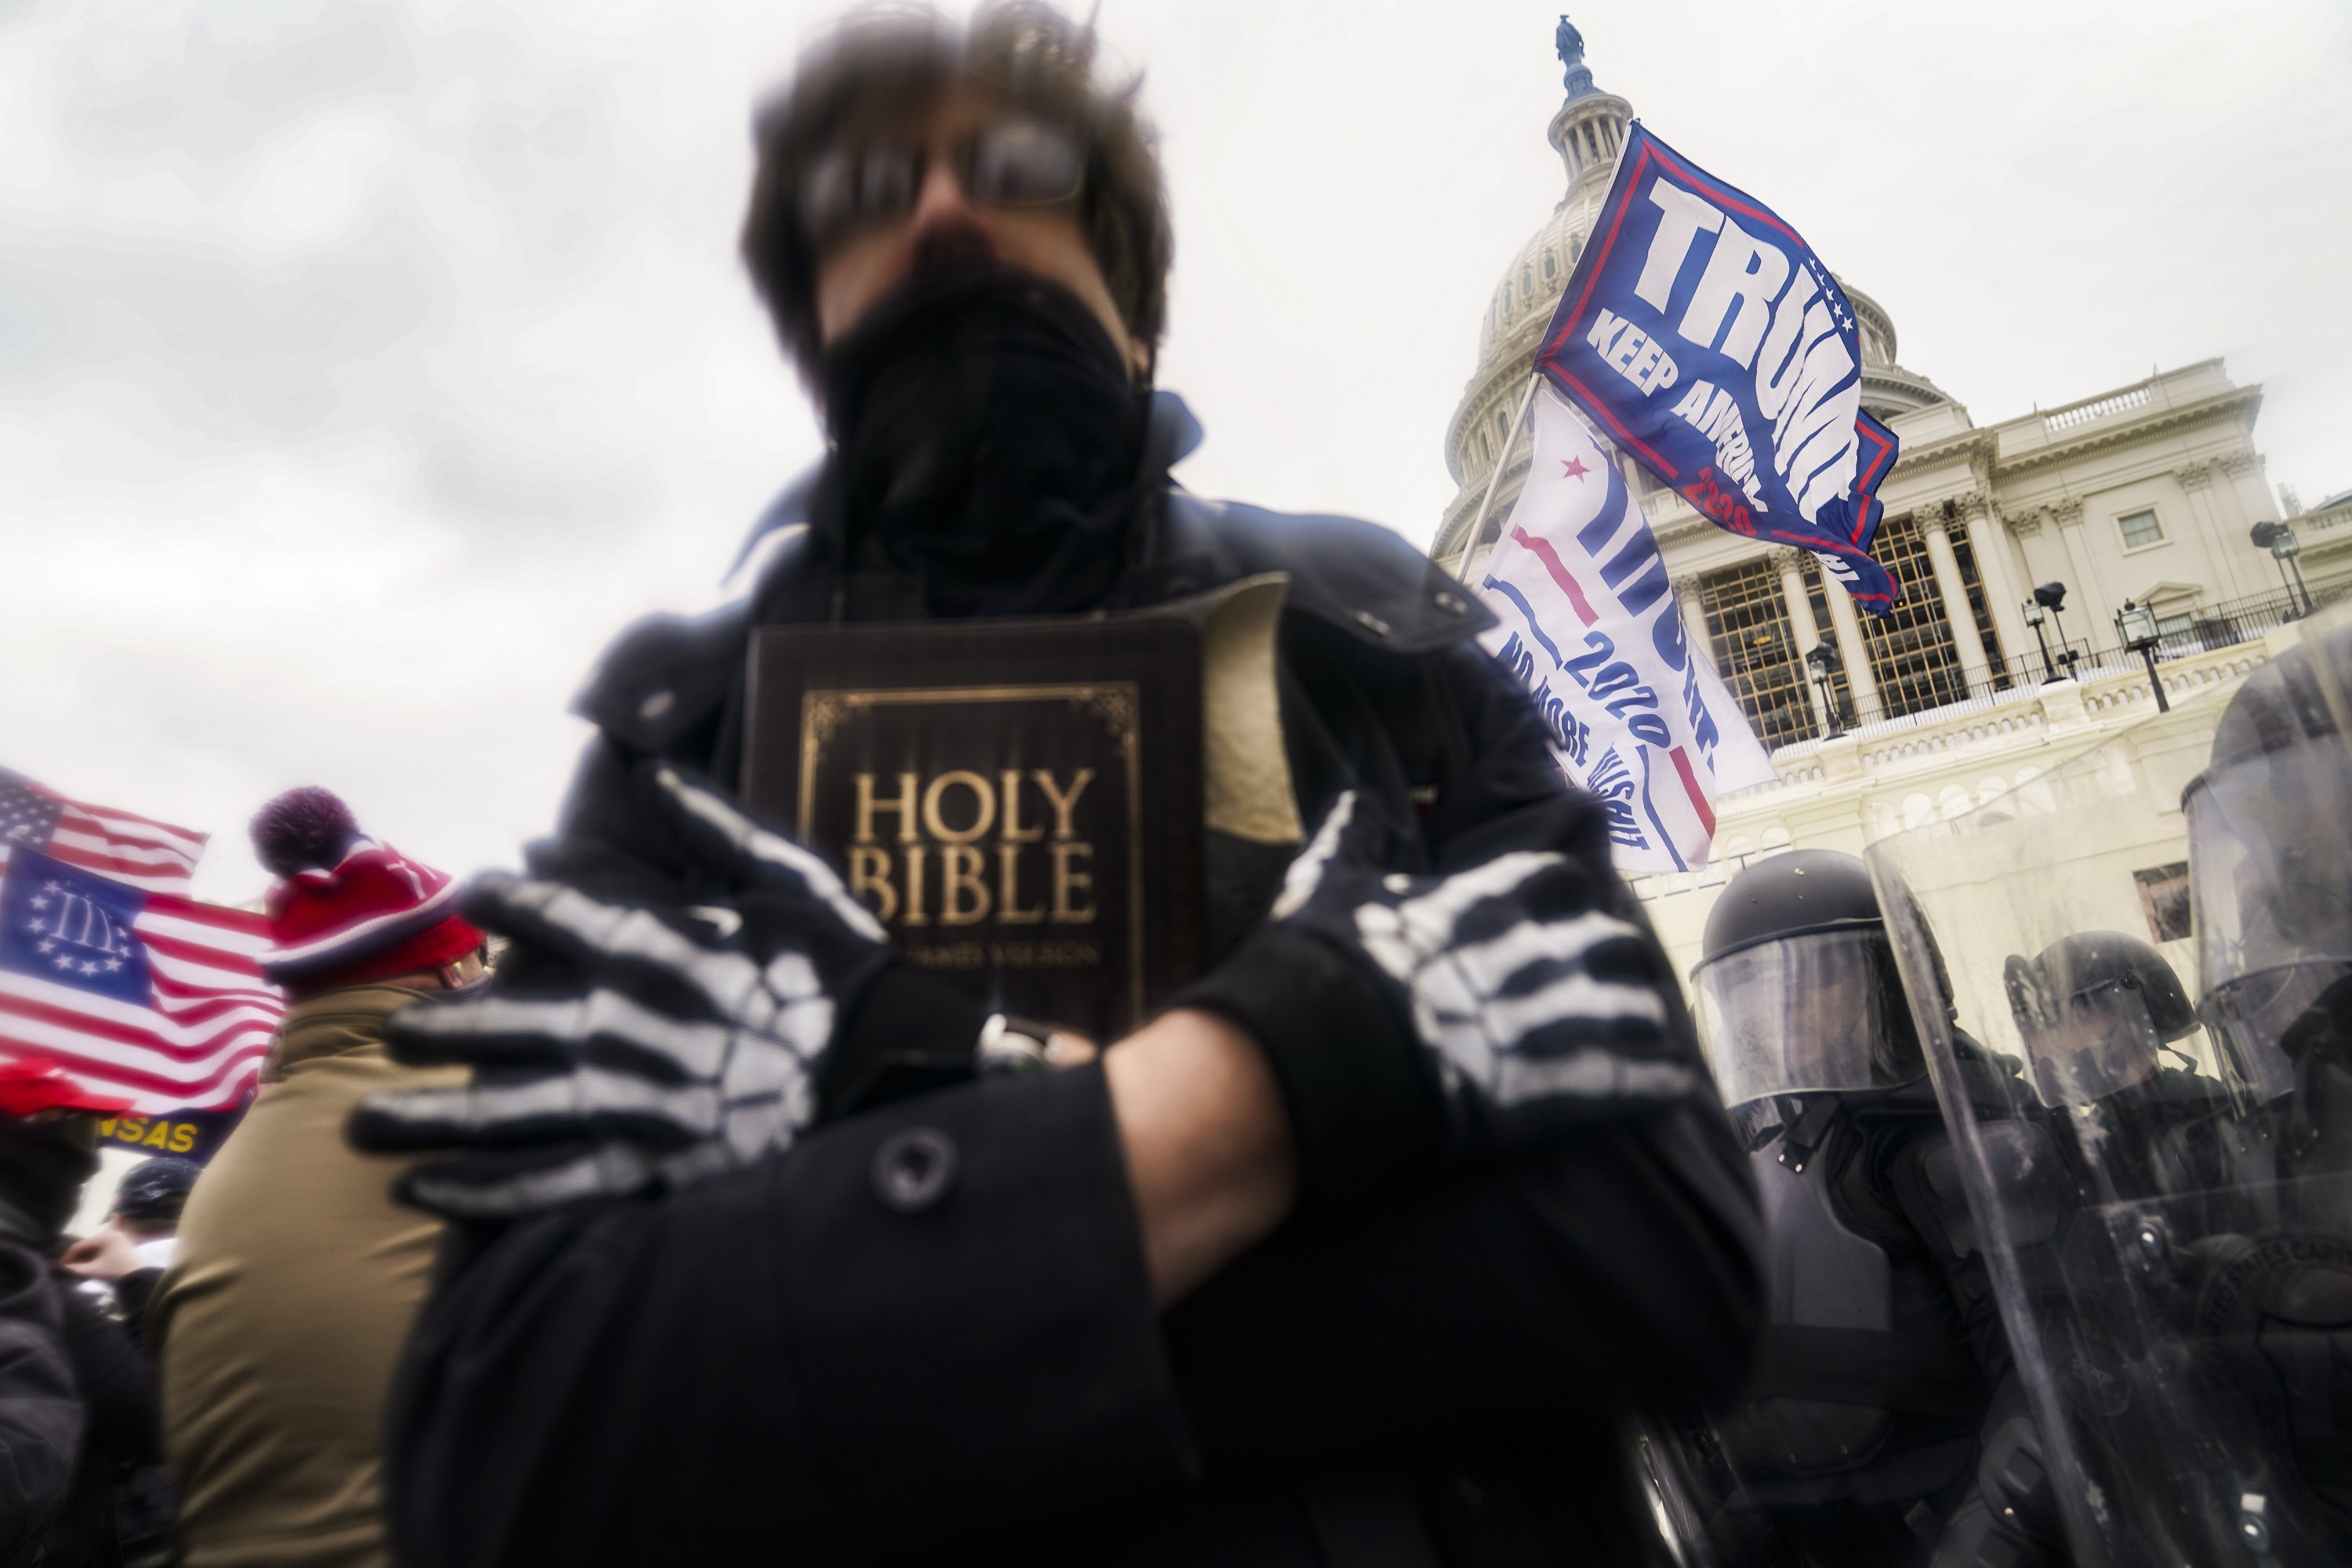 Christianity on display at Capitol riot raises new debate